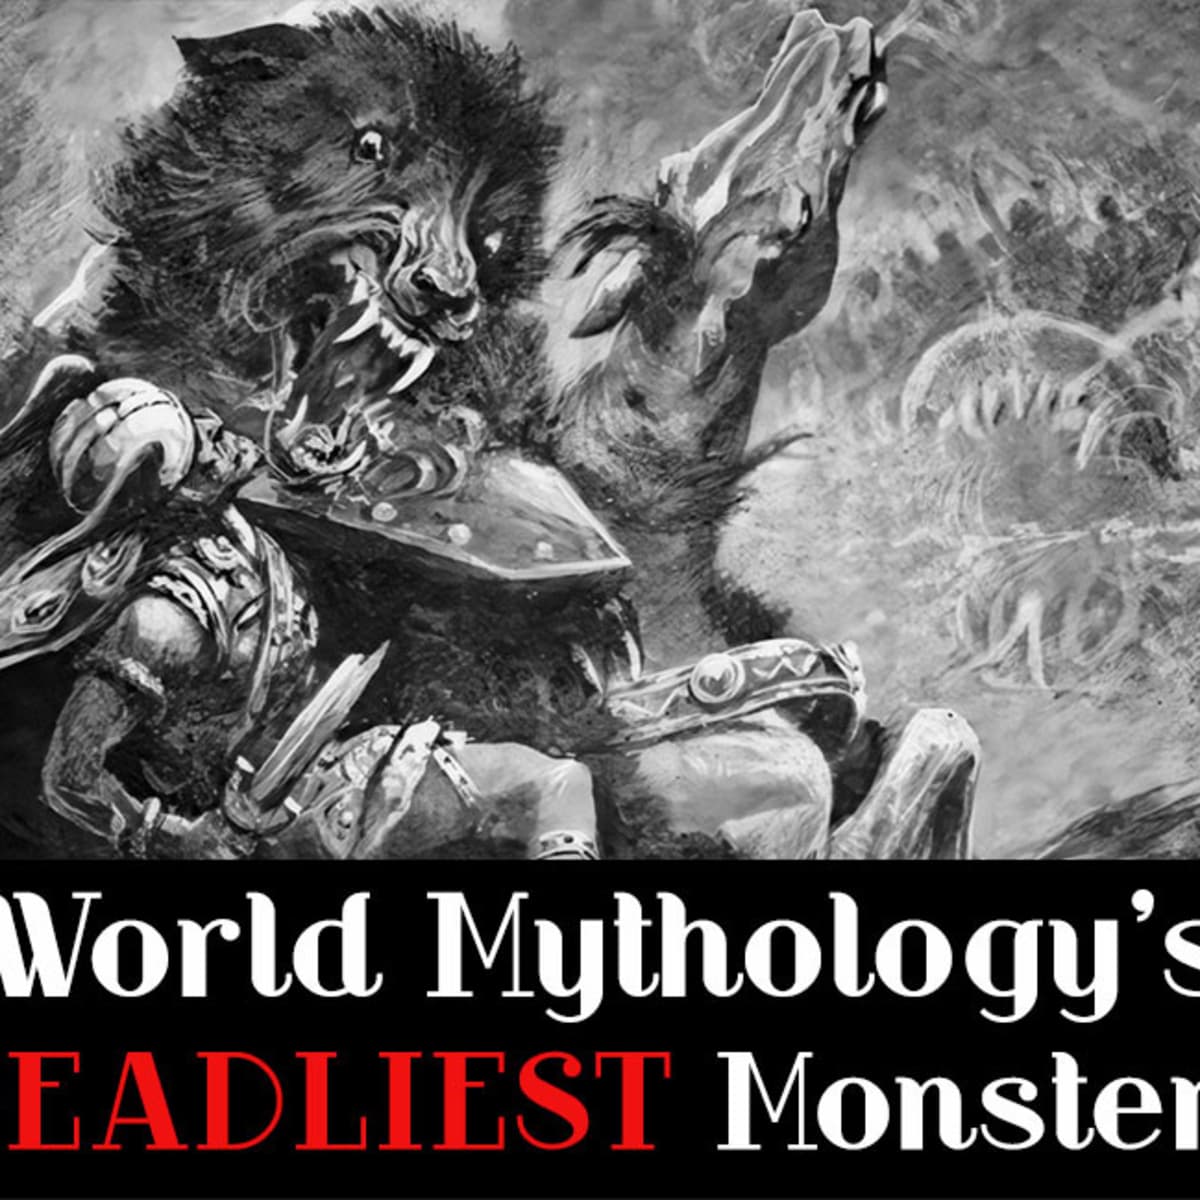 mythical monsters the scariest creatures from legends books and movies